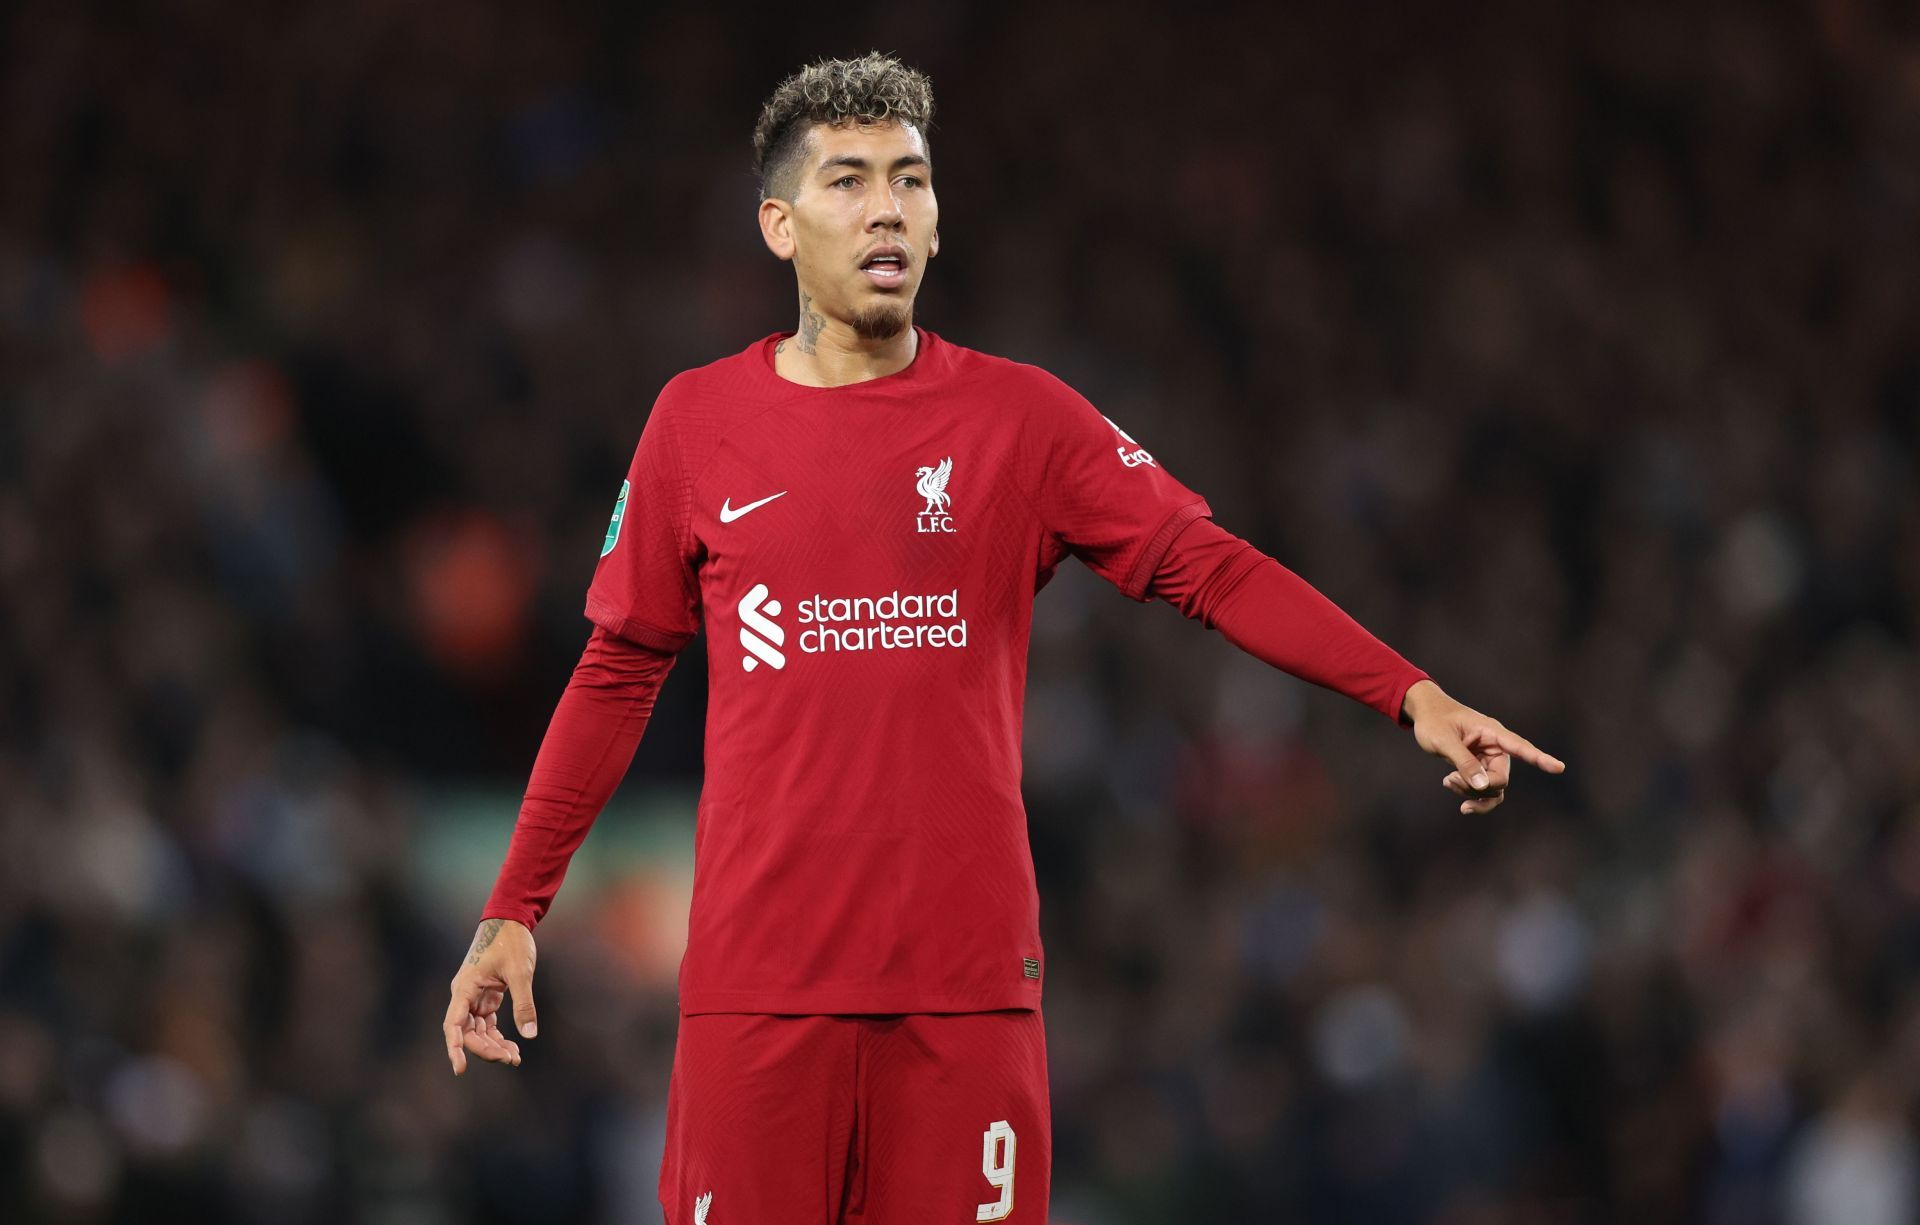 Barca are keeping tabs on Firmino.